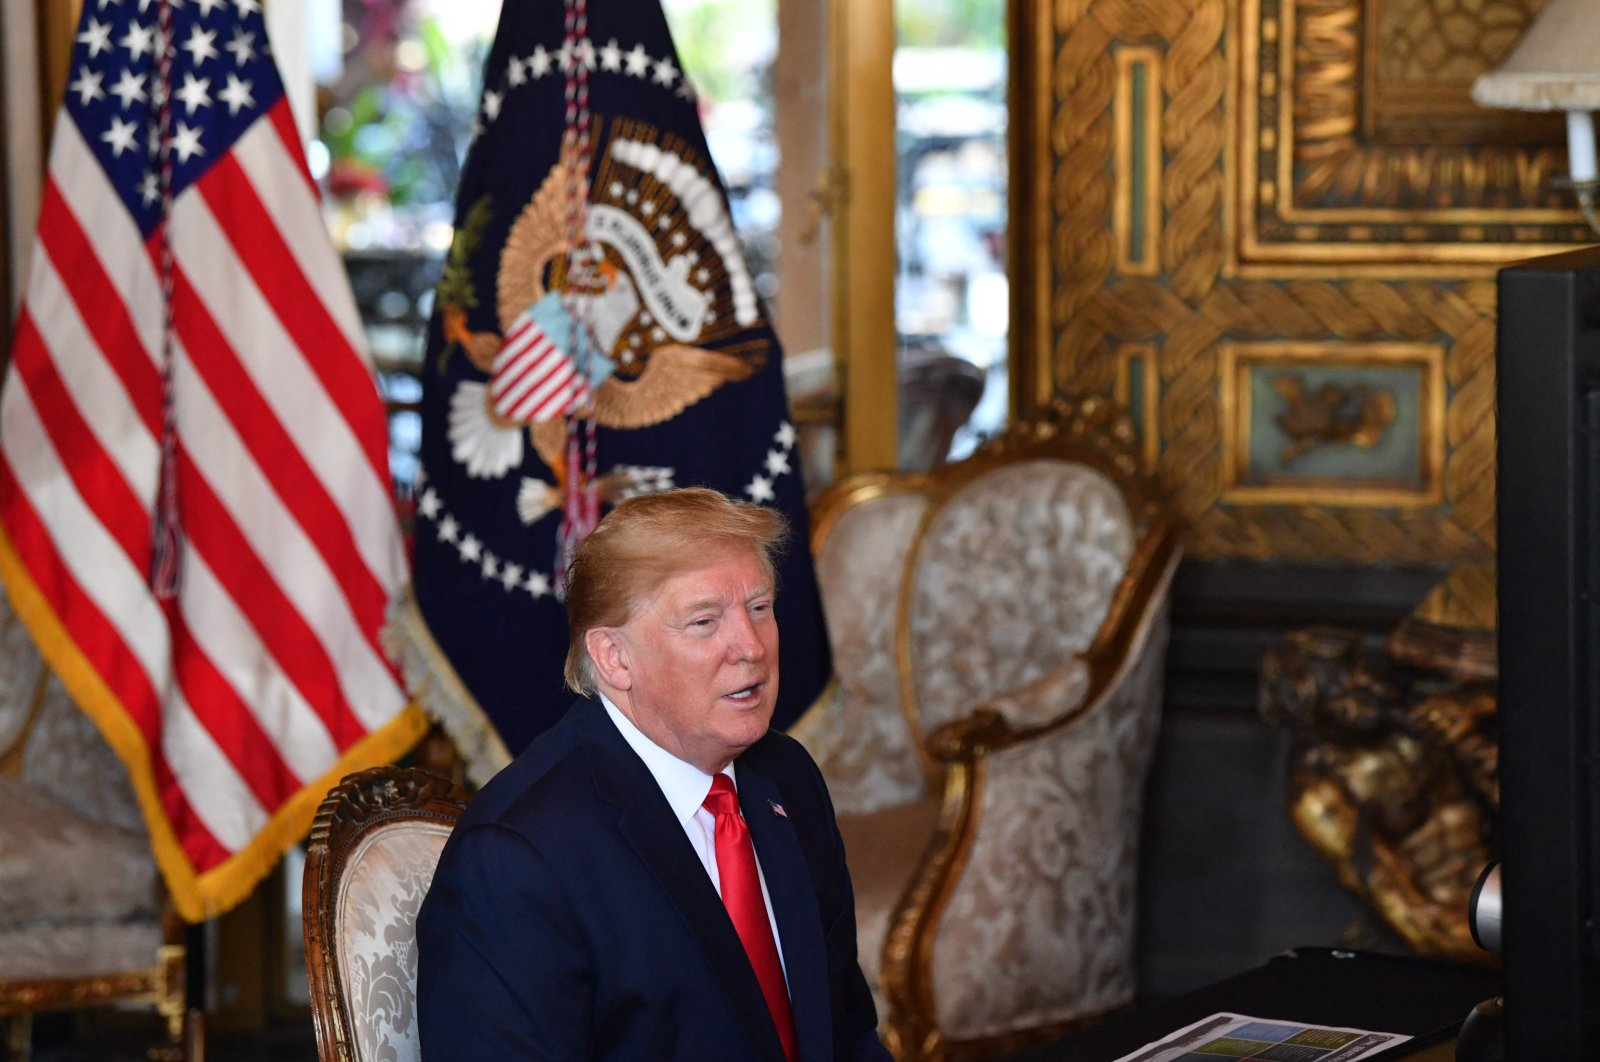 Former U.S. President Donald Trump makes a video call to troops stationed worldwide at the Mar-a-Lago estate in Palm Beach Florida, U.S., Dec. 24, 2019. (AFP Photo)